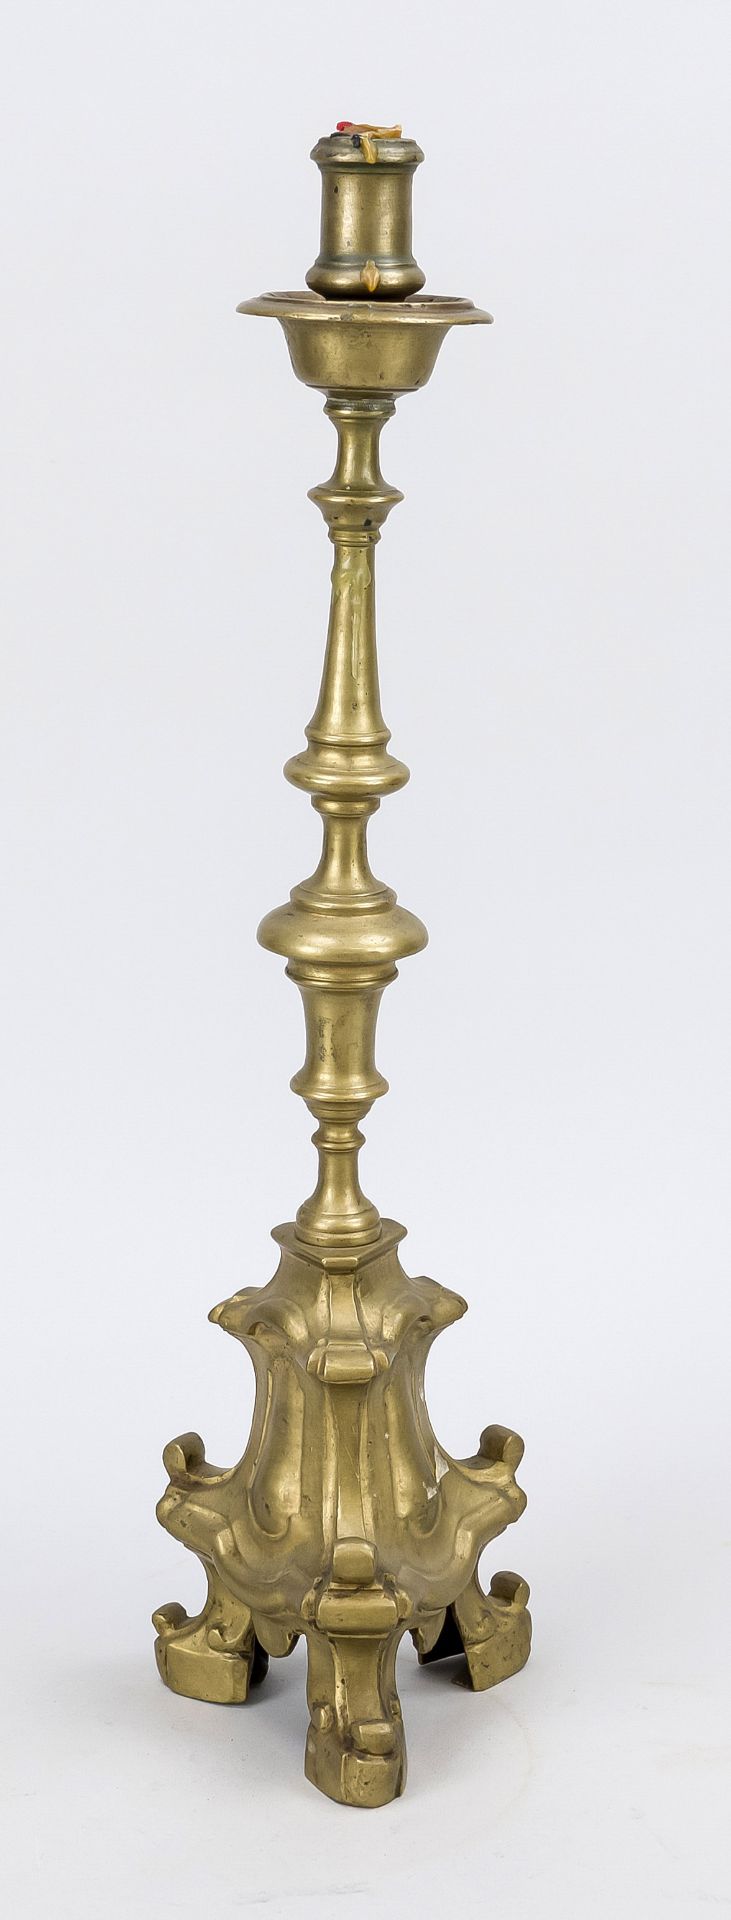 Candlestick, 18th/19th century, bronze. Trefoil base, balustrated shaft, slightly rubbed & bumped,